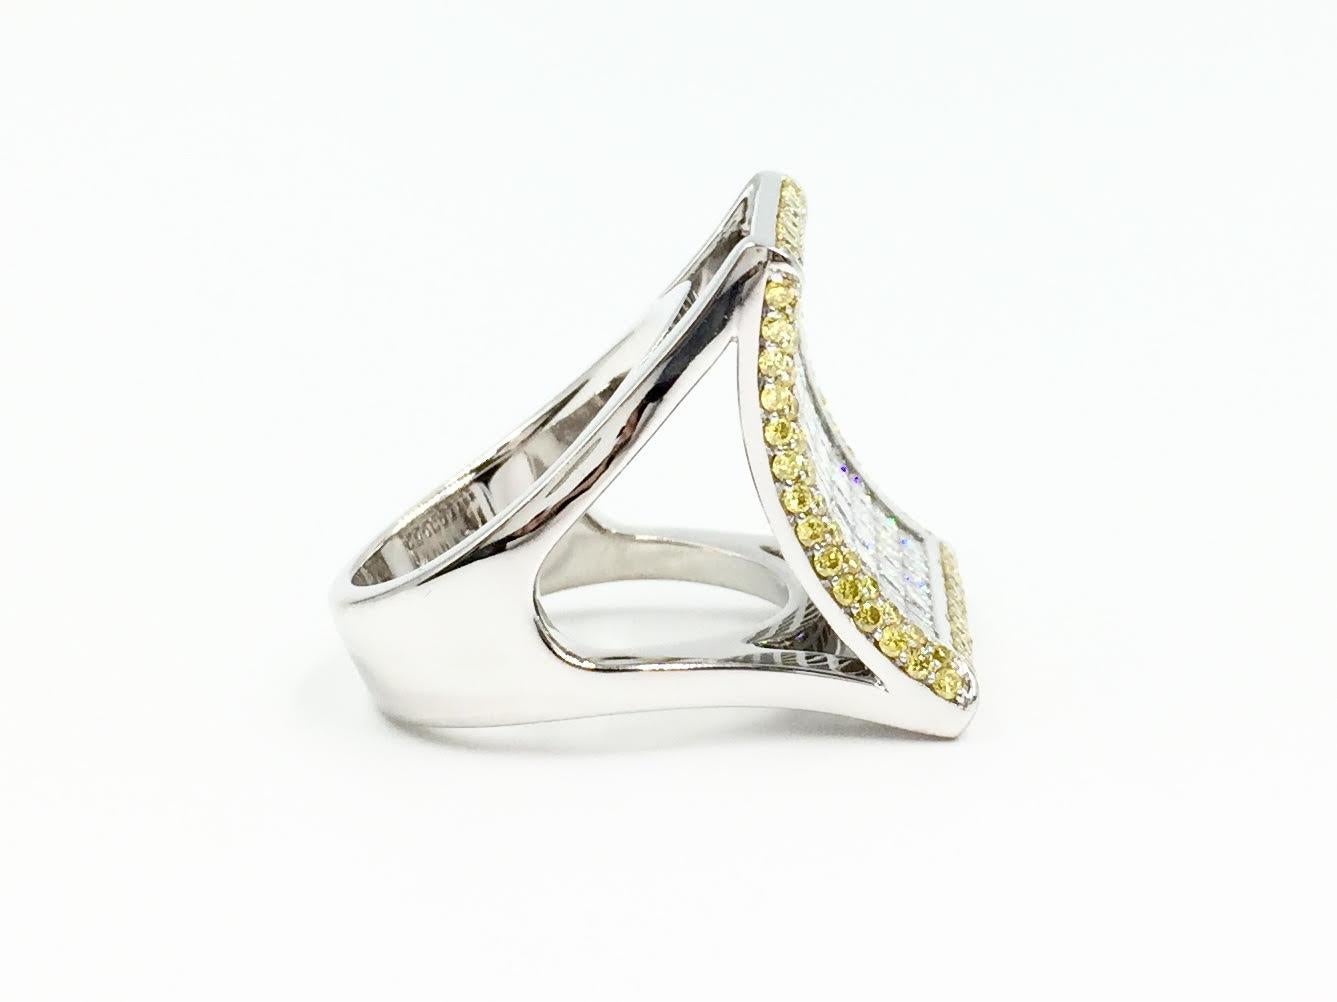 Exceptional quality and unique modern design by designer Sasha Primak. This curved 18 karat white gold ring features expertly invisibly set white princess cut diamonds and a pavé set fancy yellow diamond border. with 3.90 carats total weight. High